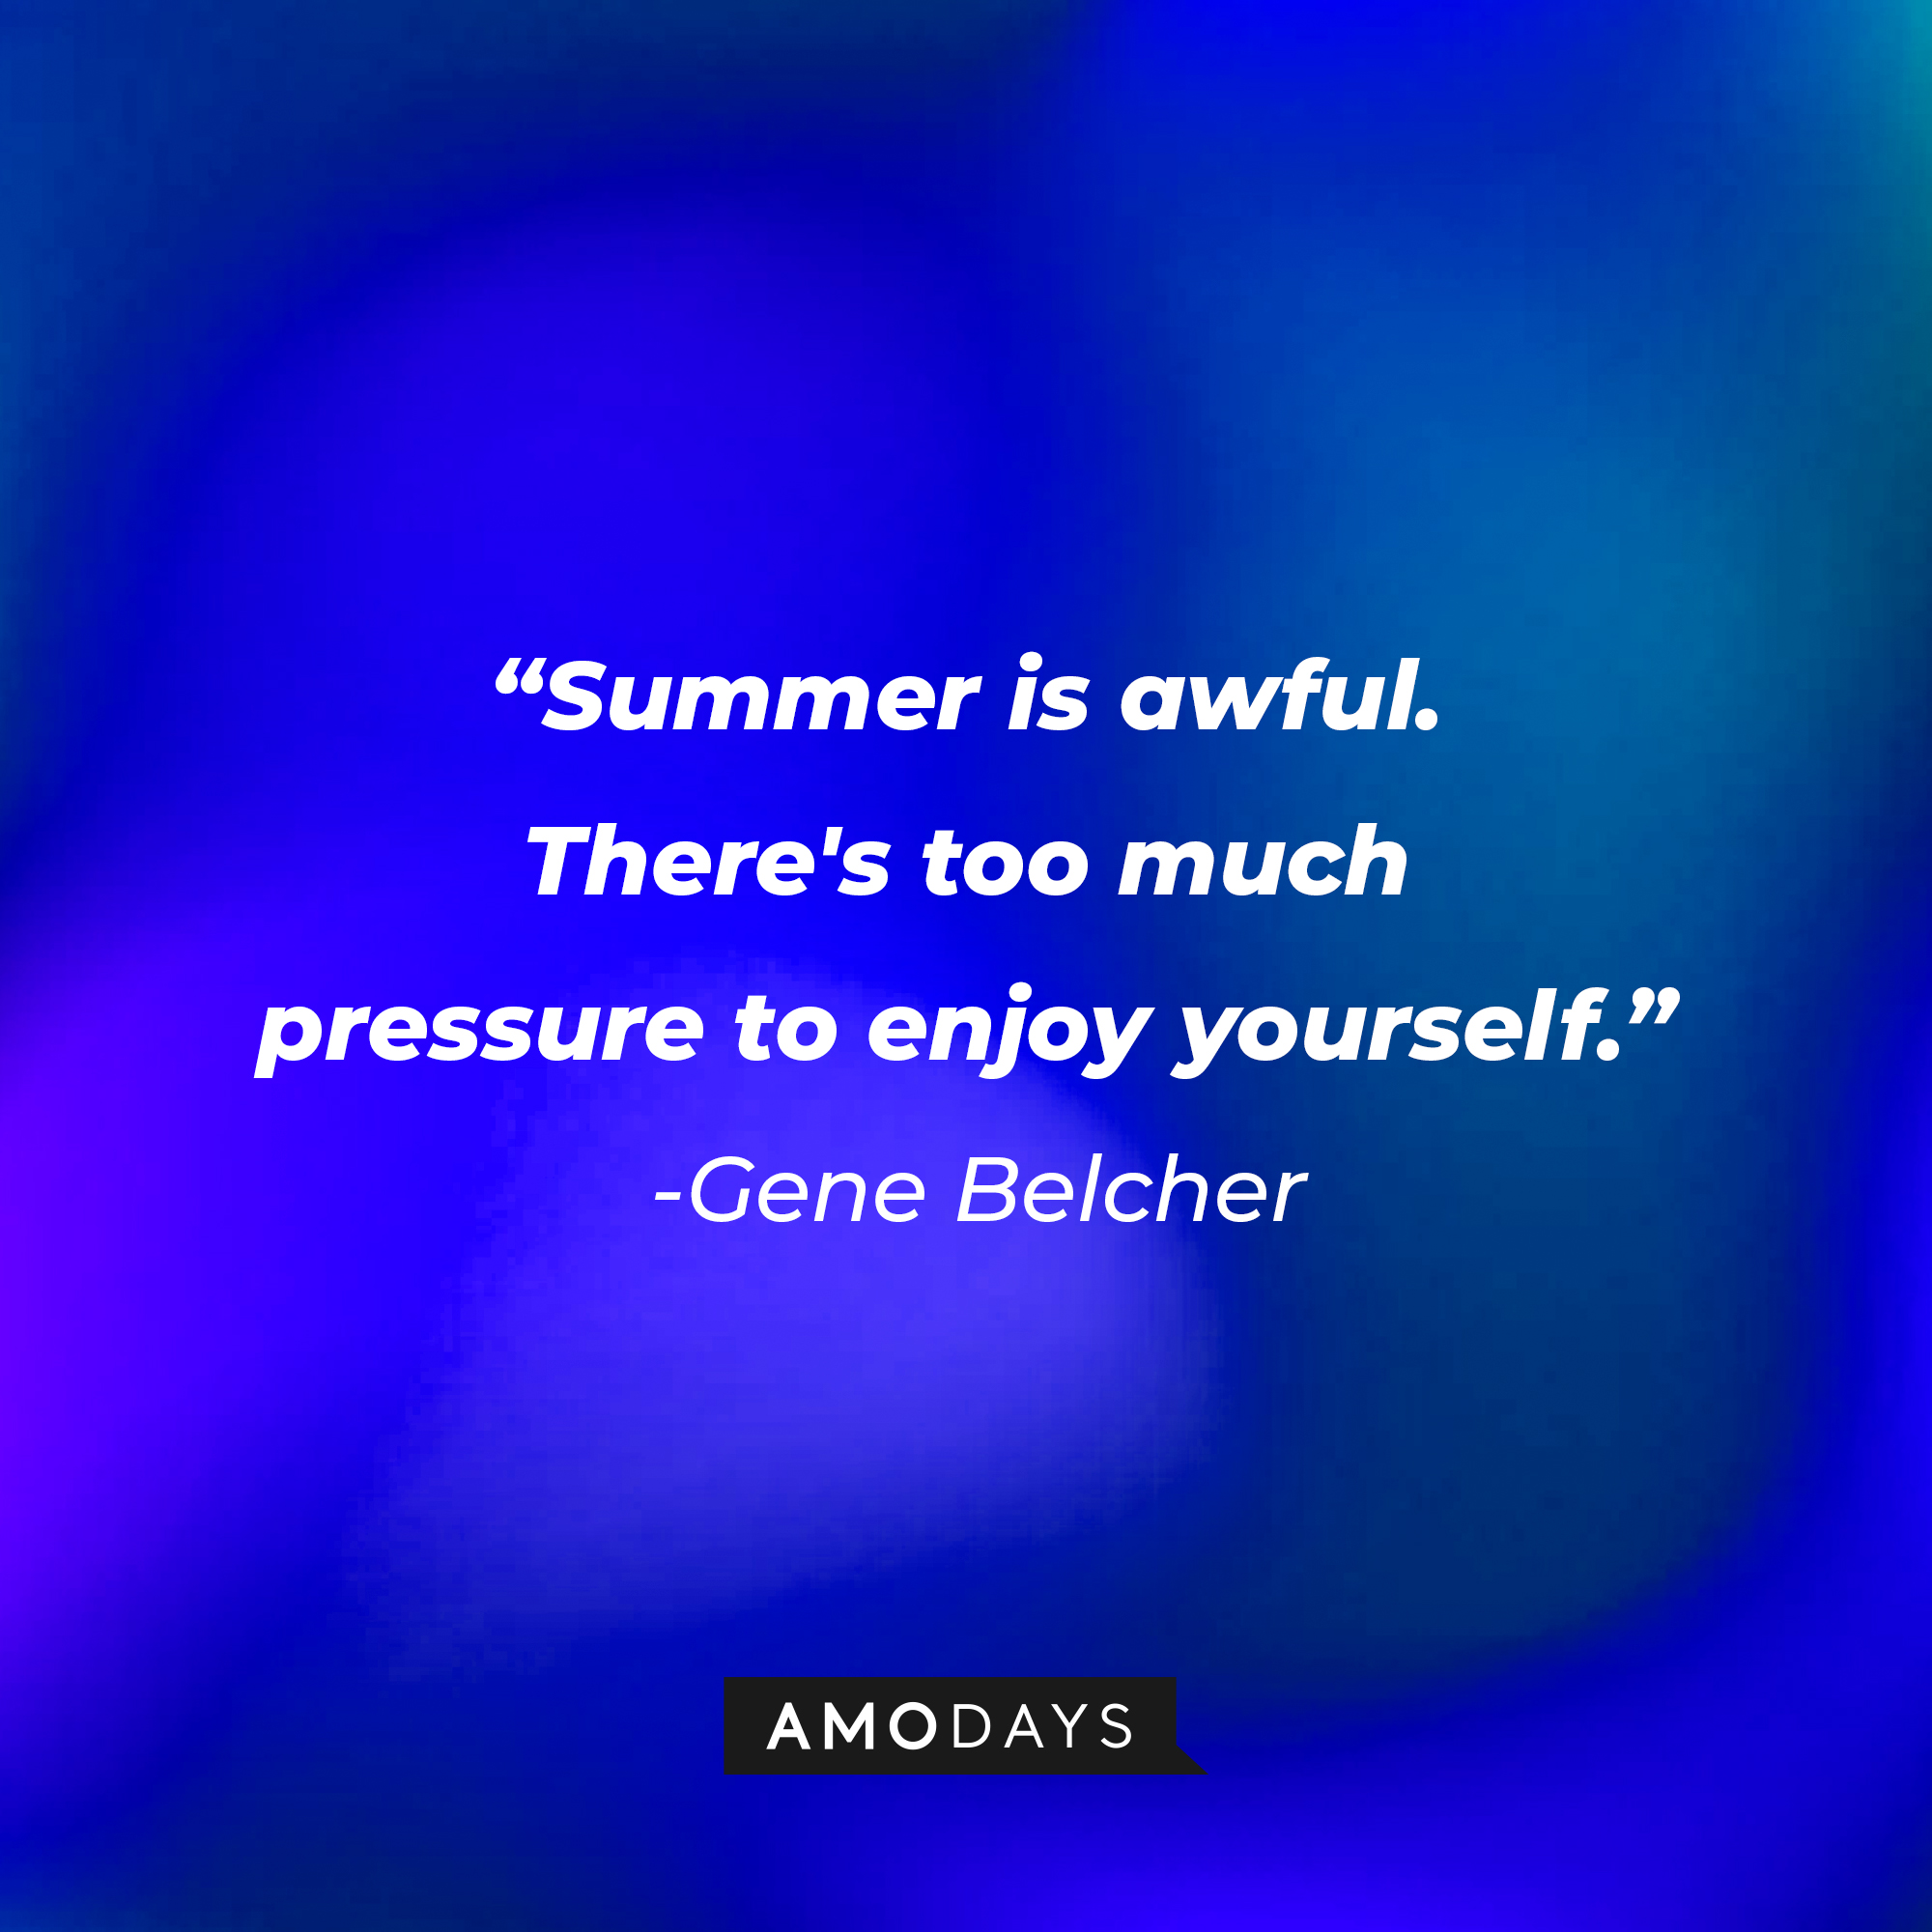 Gene Belcher's quote: "Summer is awful. There's too much pressure to enjoy yourself." | Source: Amodays